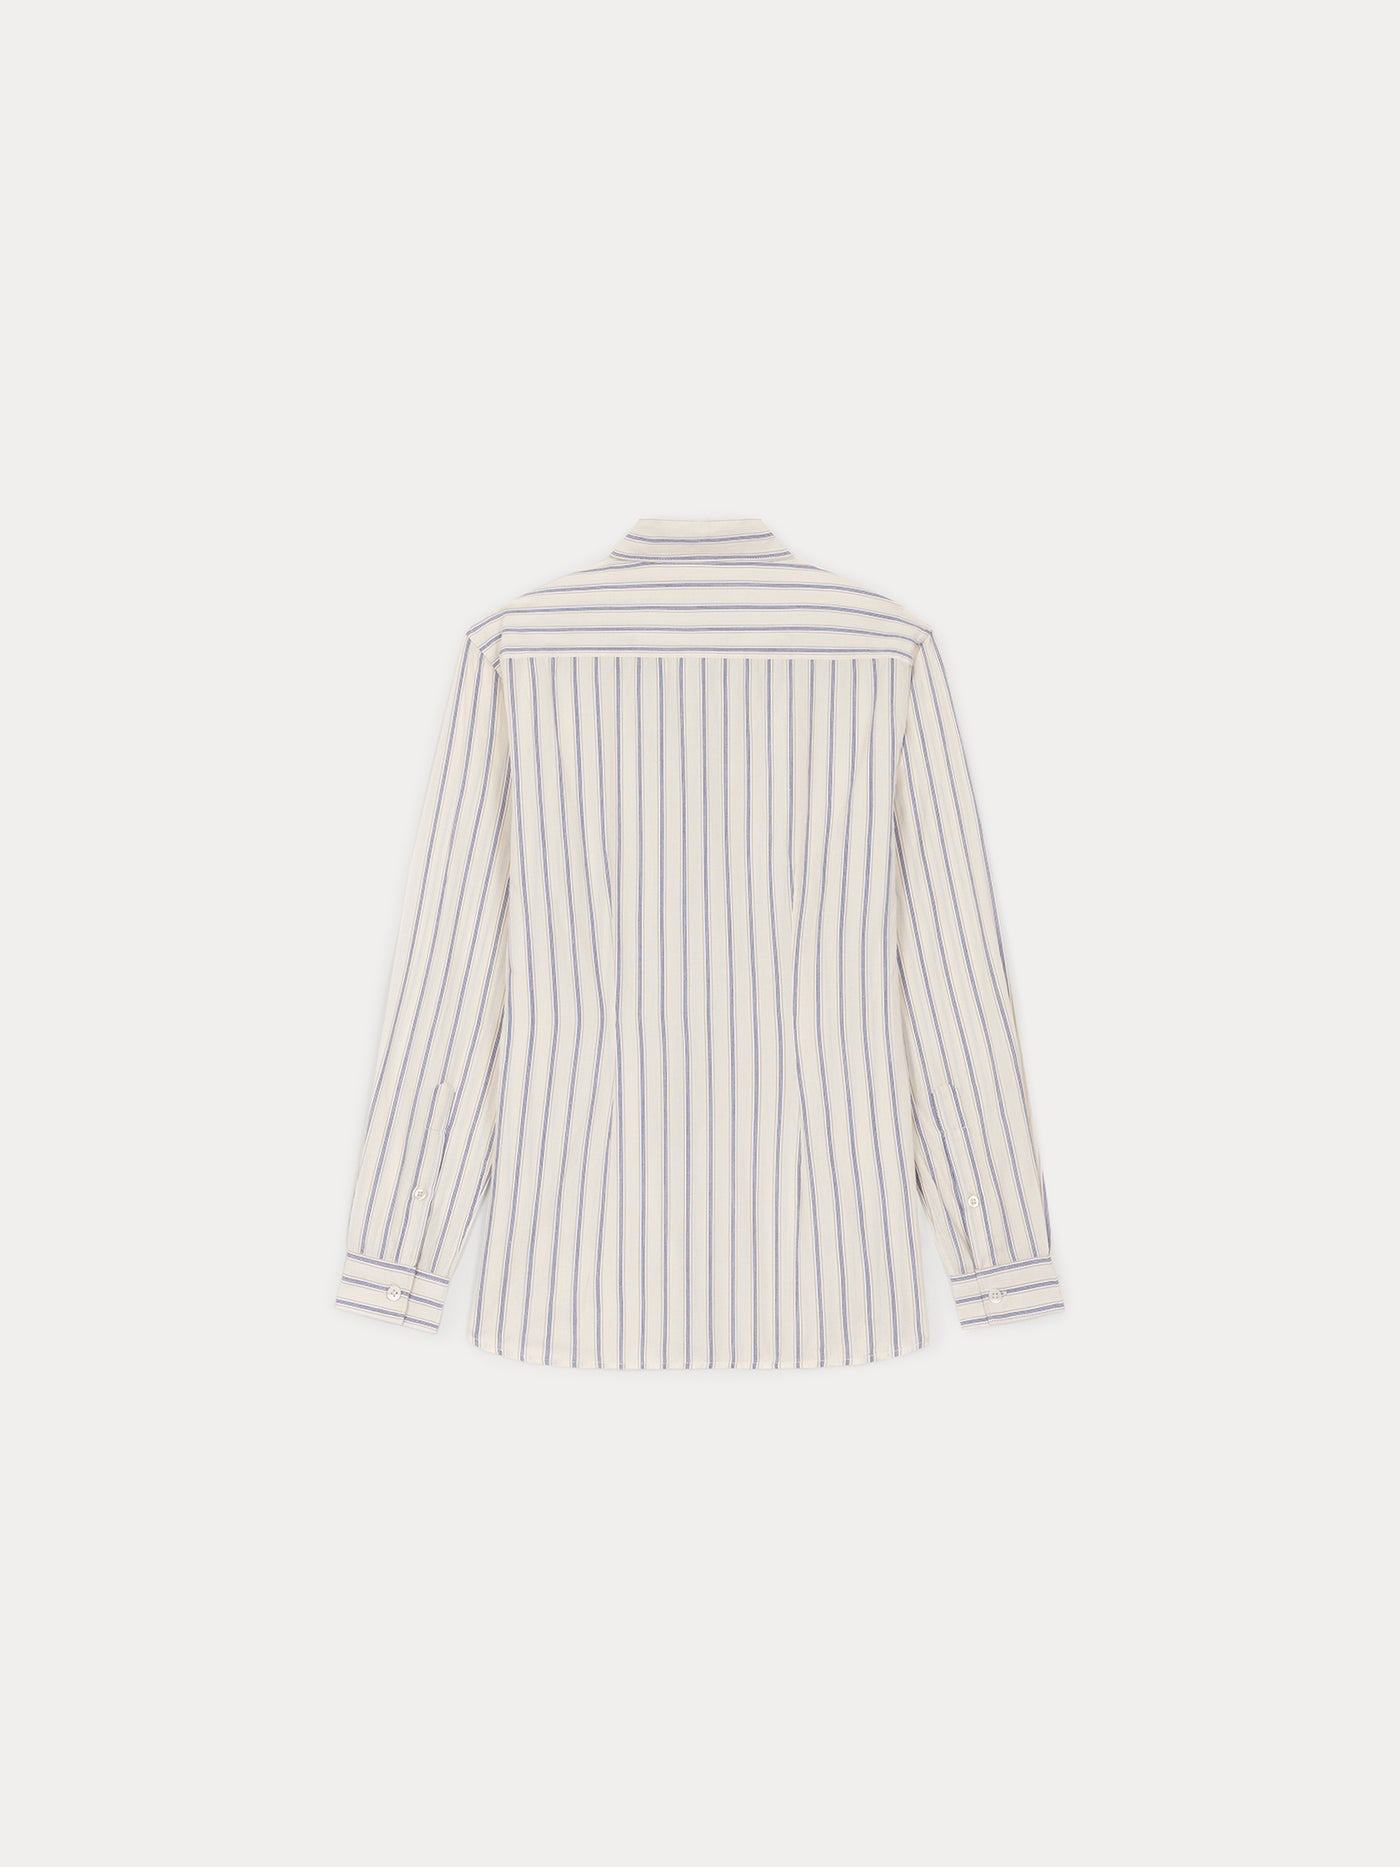 Off-white and blue striped shirt in cotton